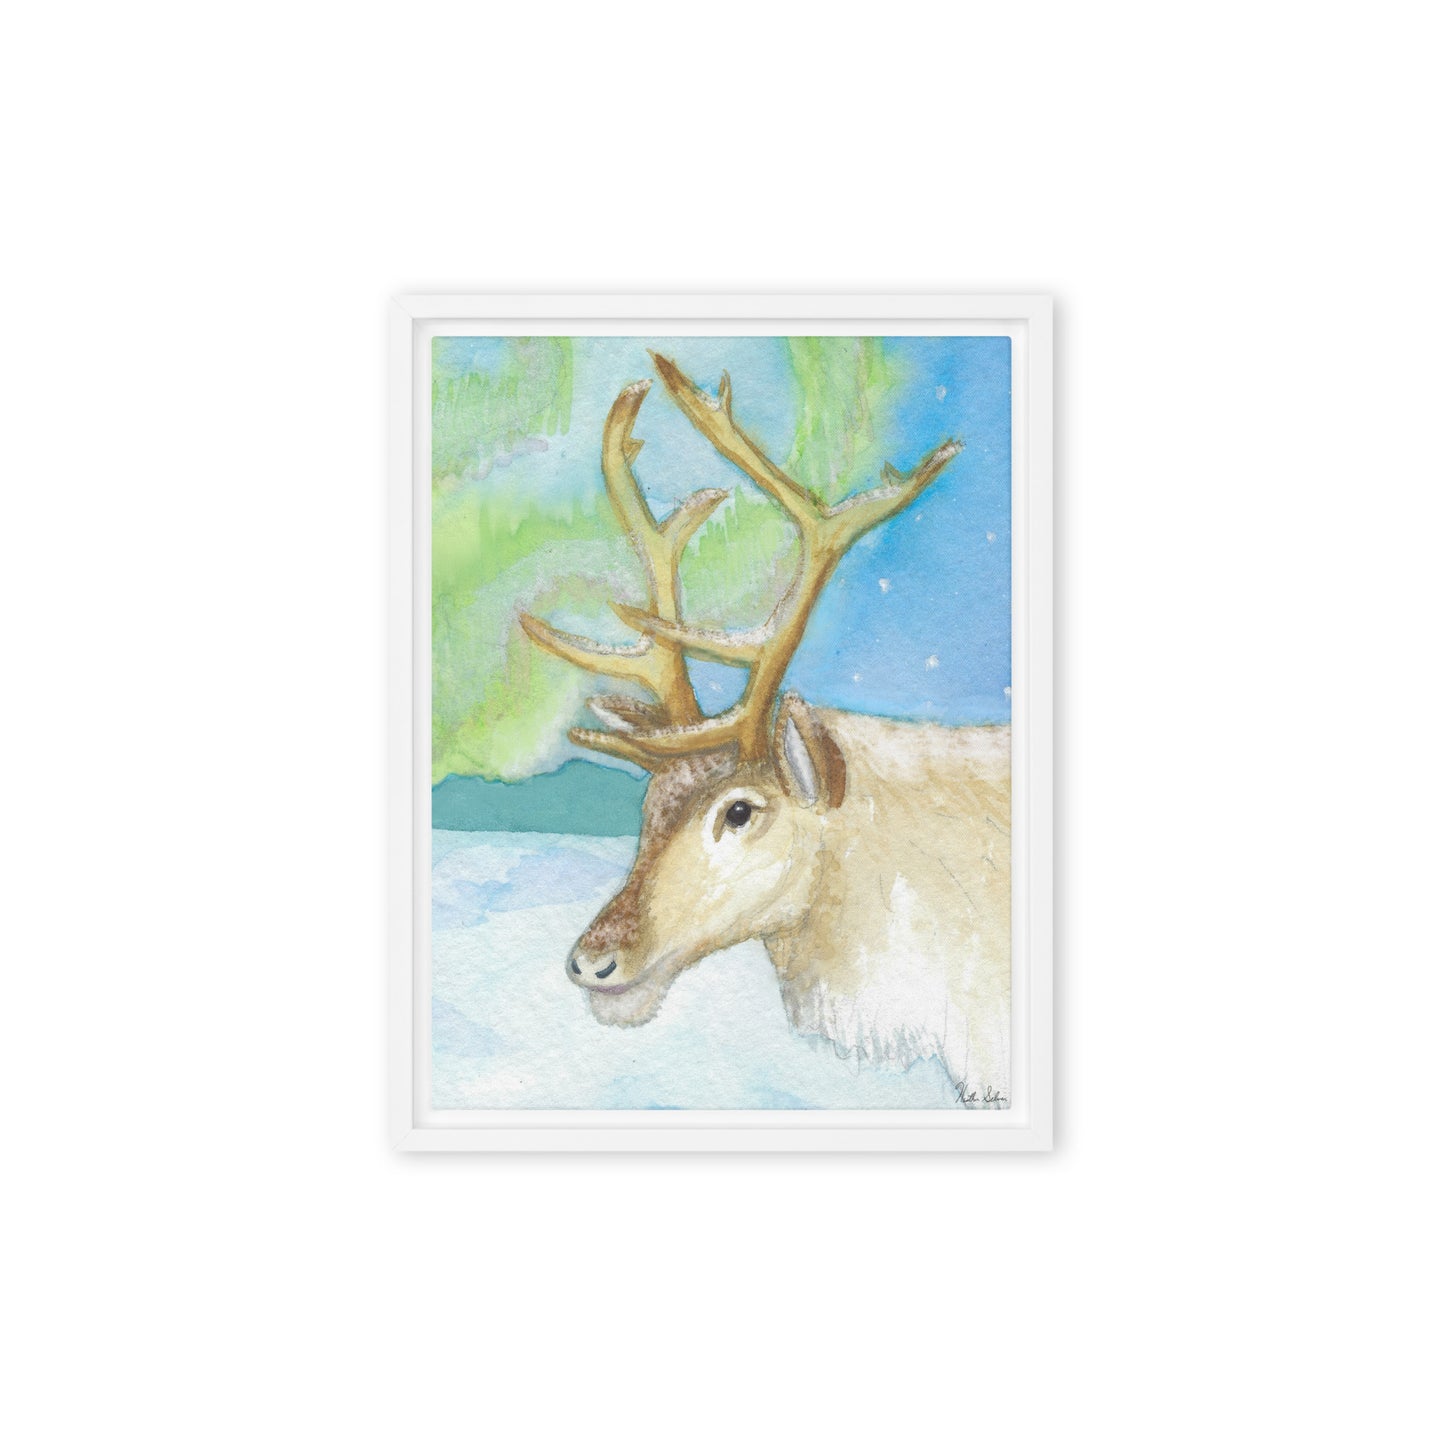 12 by 16 inch framed canvas art print of Heather Silver's Northern Lights Reindeer.  Canvas print mounted in a white pine frame. Hanging hardware included.